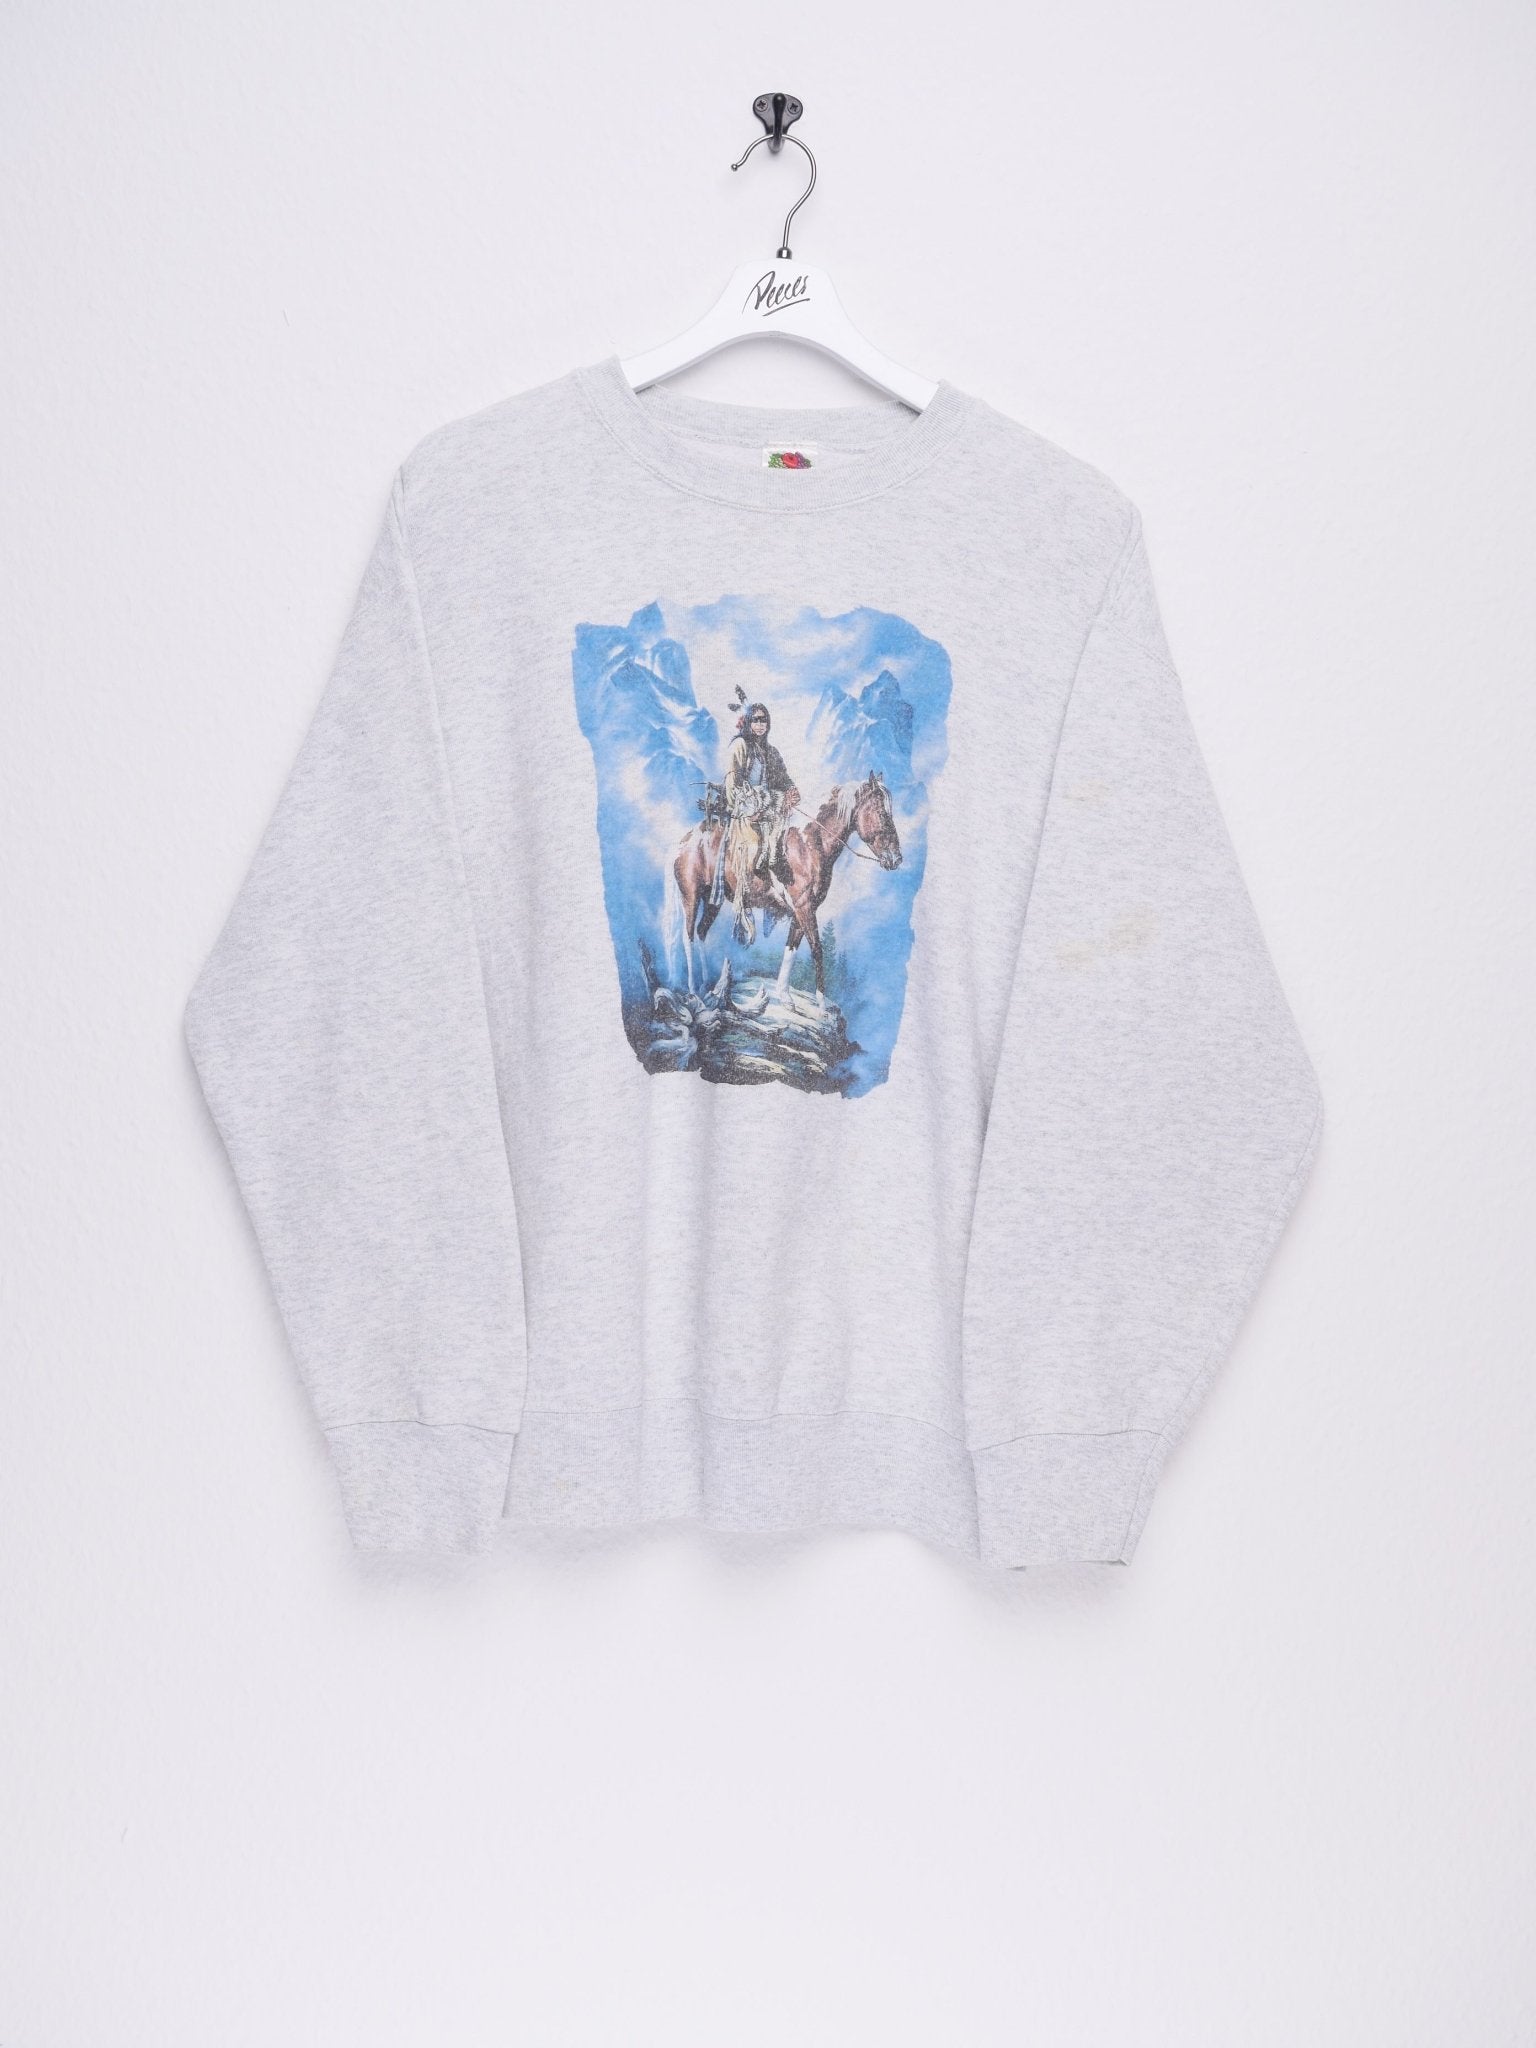 'Indigenous' printed Graphic grey Sweater - Peeces